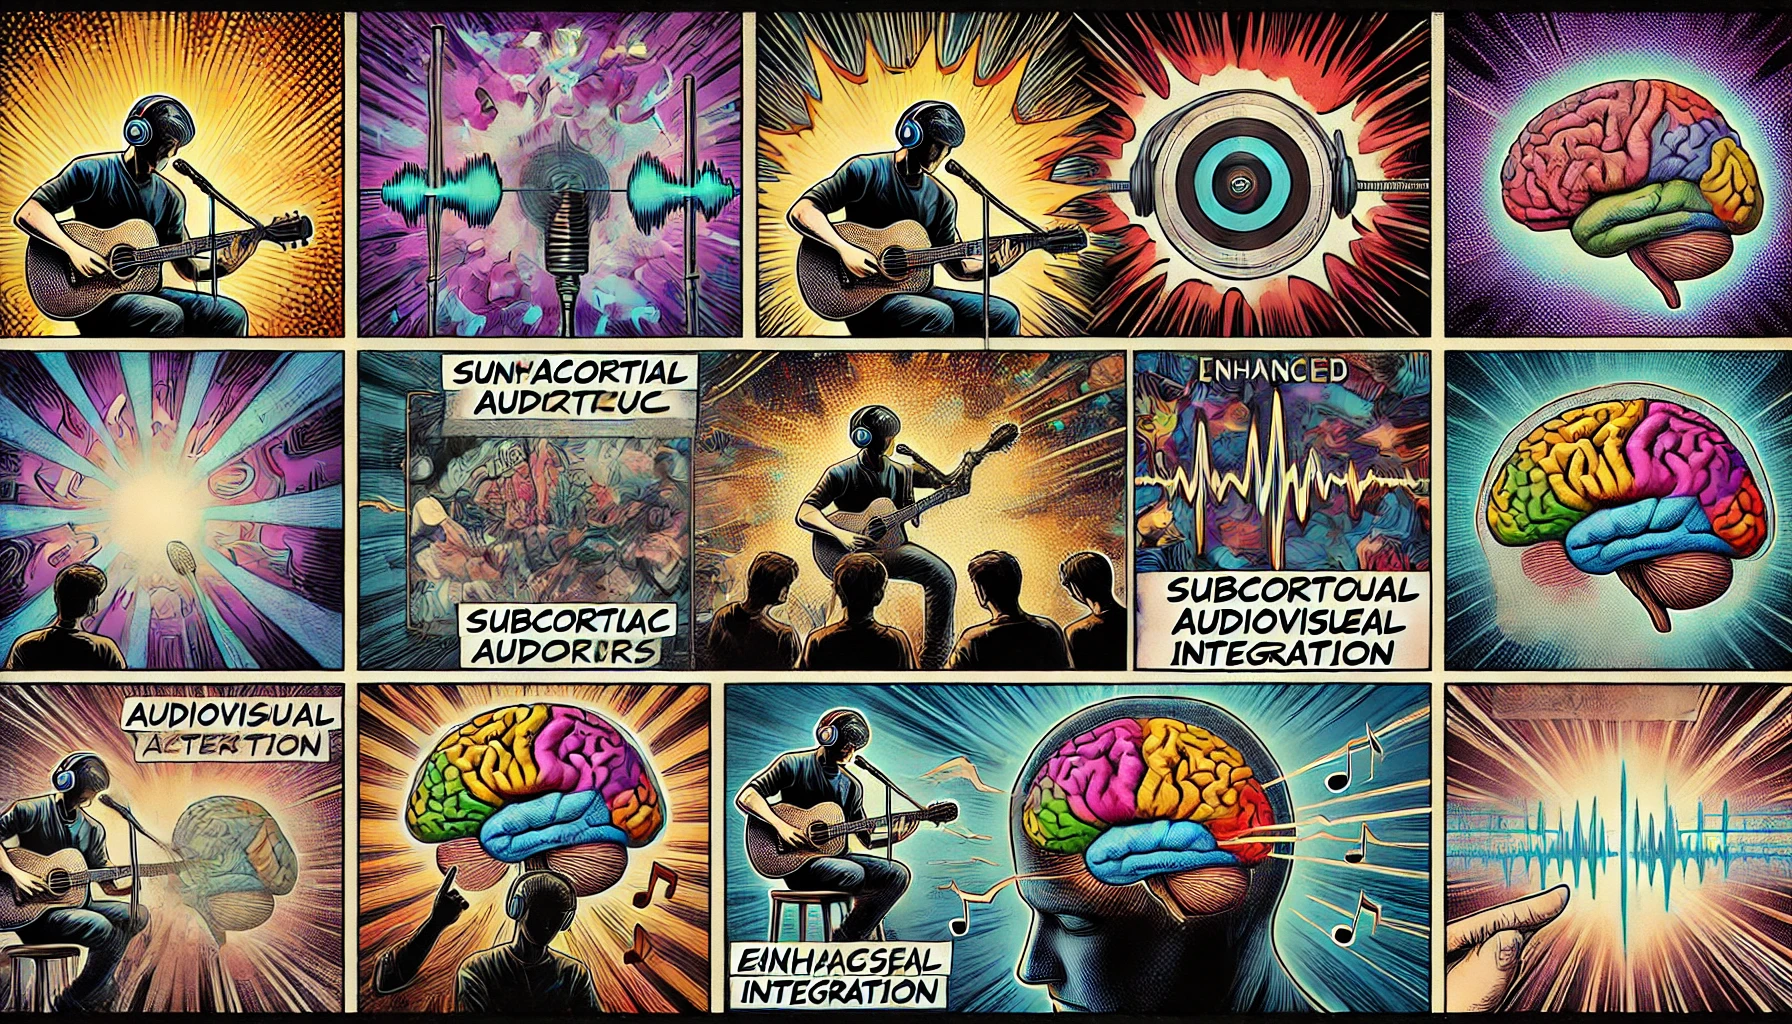 DALL·E 2024 07 02 09.10.36 A comic book style image with various panes appearing loosely over a montage integrating content related to musicians enhanced subcortical auditory